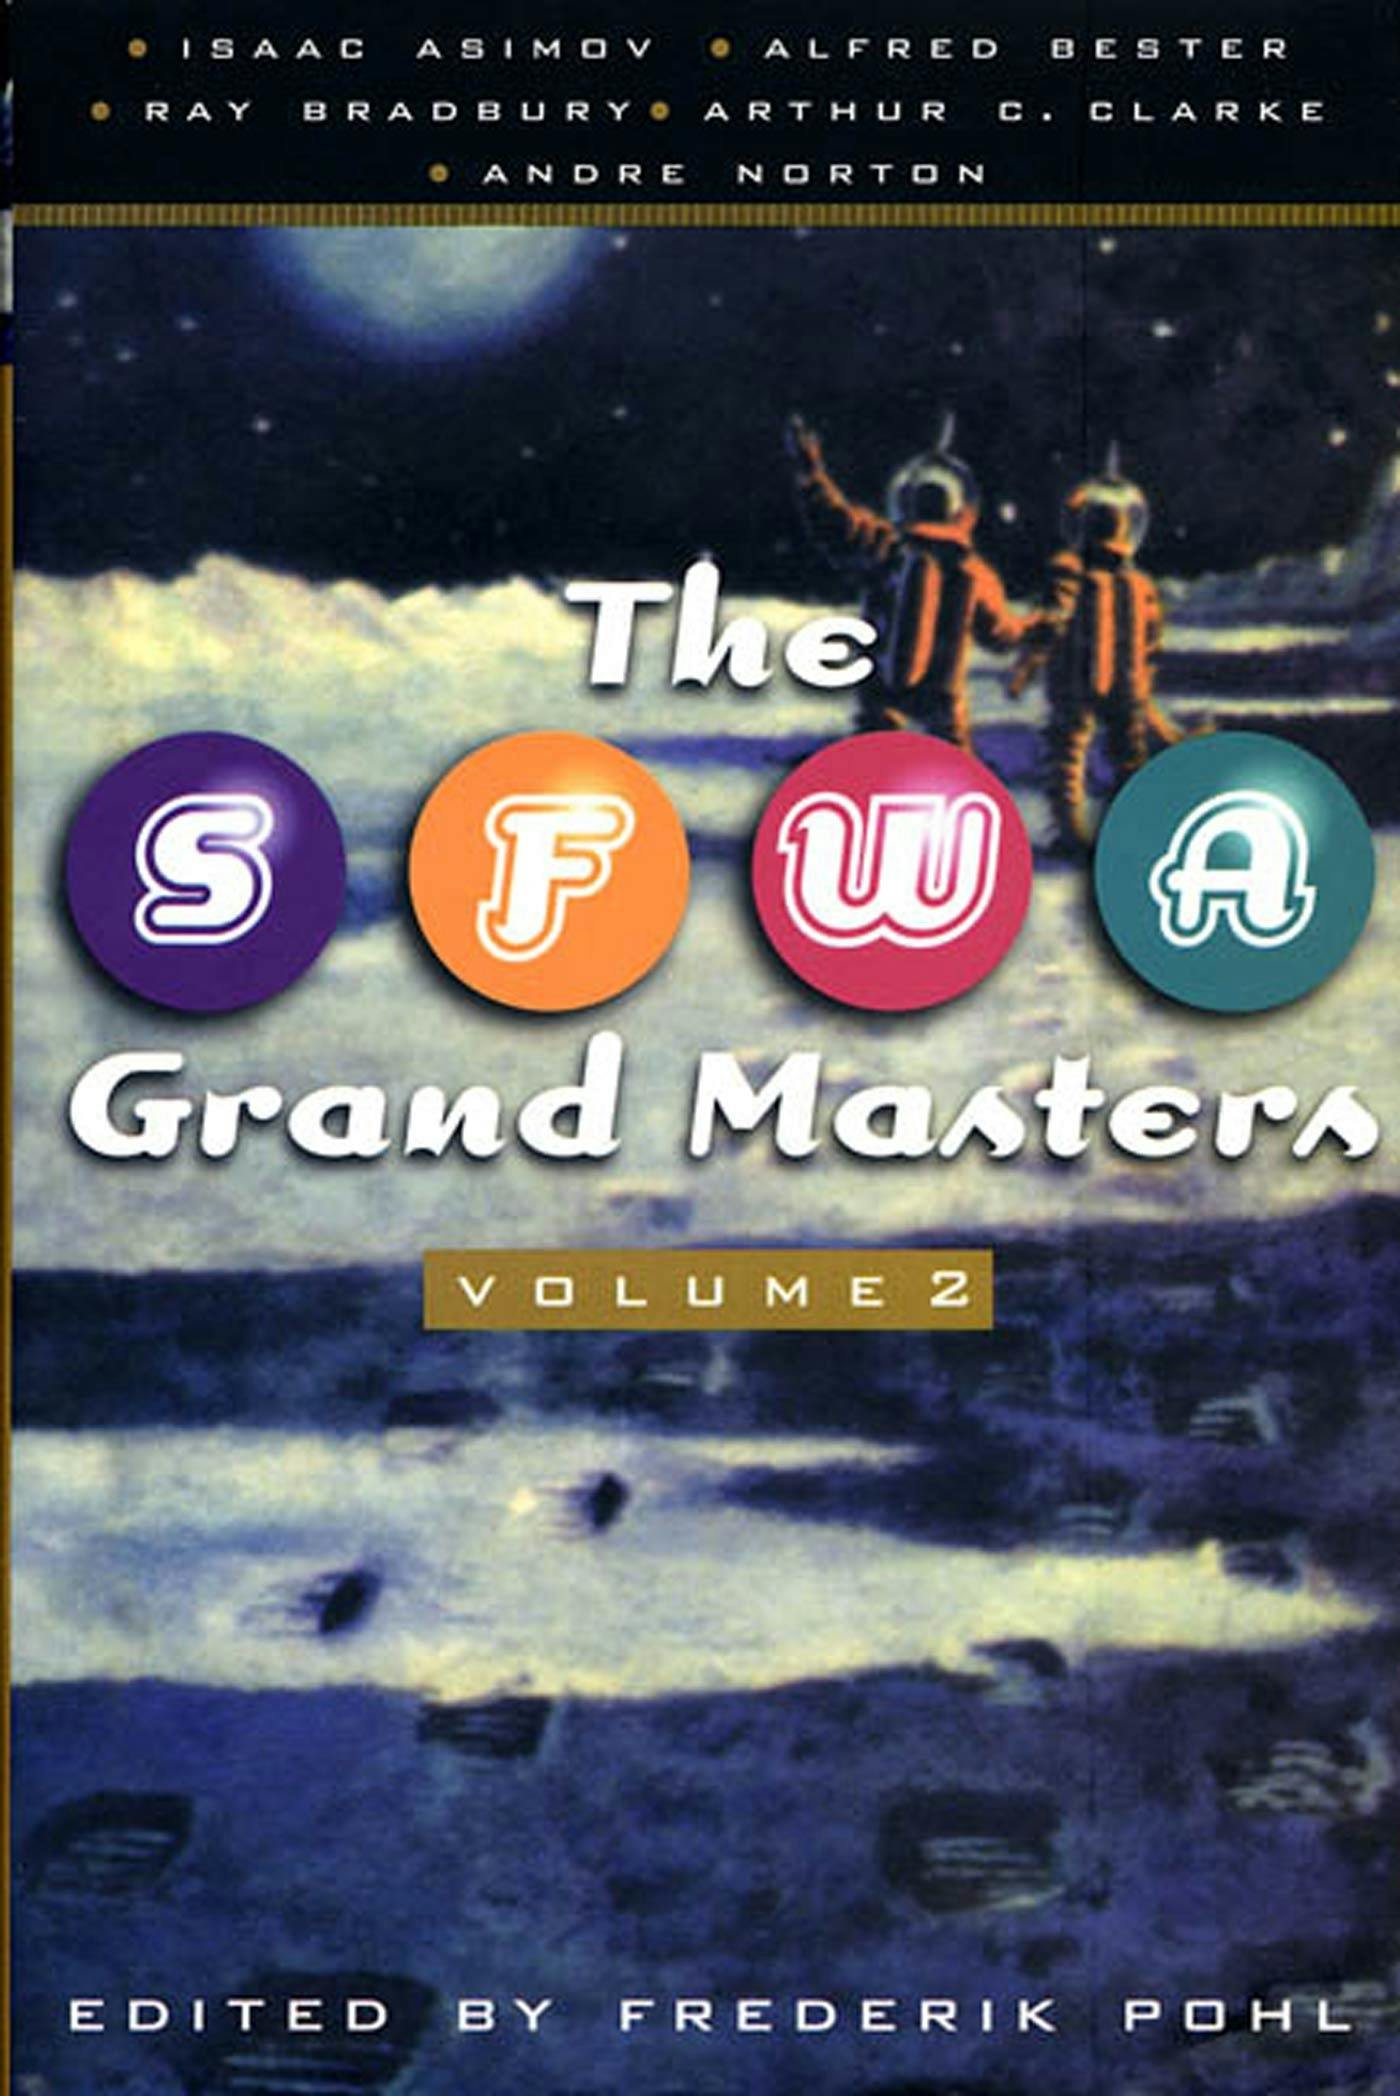 Cover for the book titled as: The SFWA Grand Masters: Volume 2